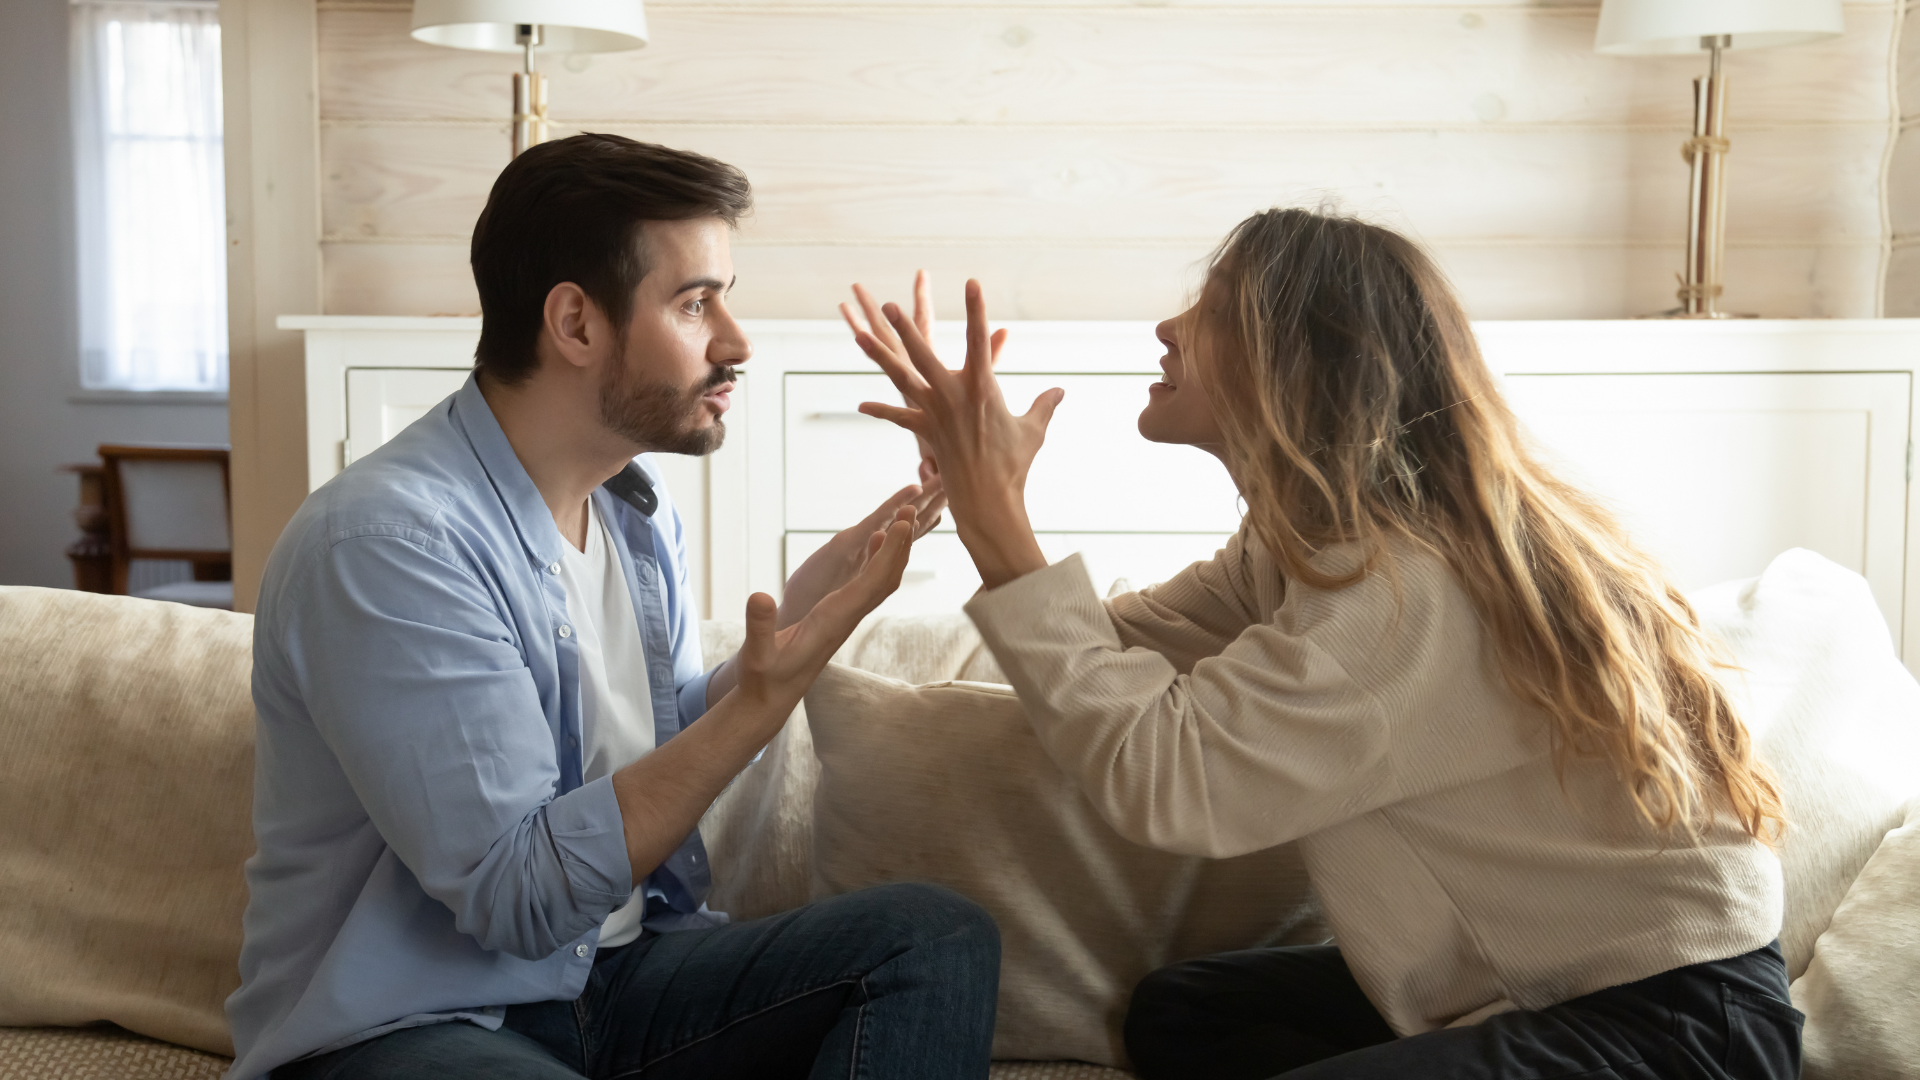 Five Tips to Deal With Emotional Infidelity